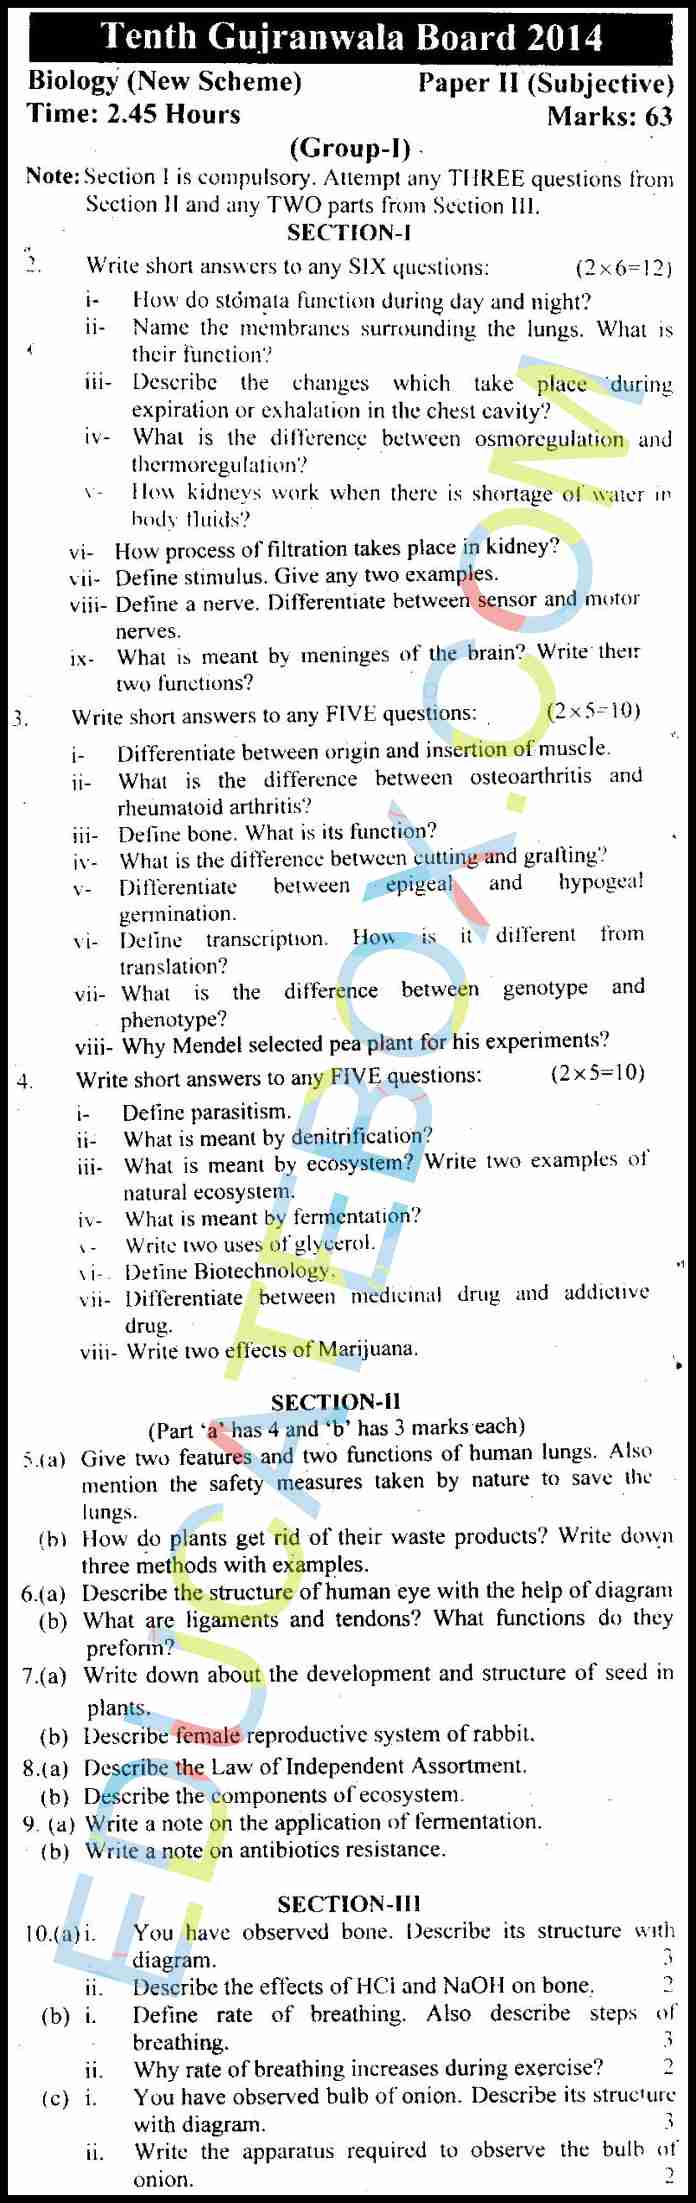 Past Paper Class 10 Biology Gujranwala Board 2014 Subjective Type Group 1 (English Medium)